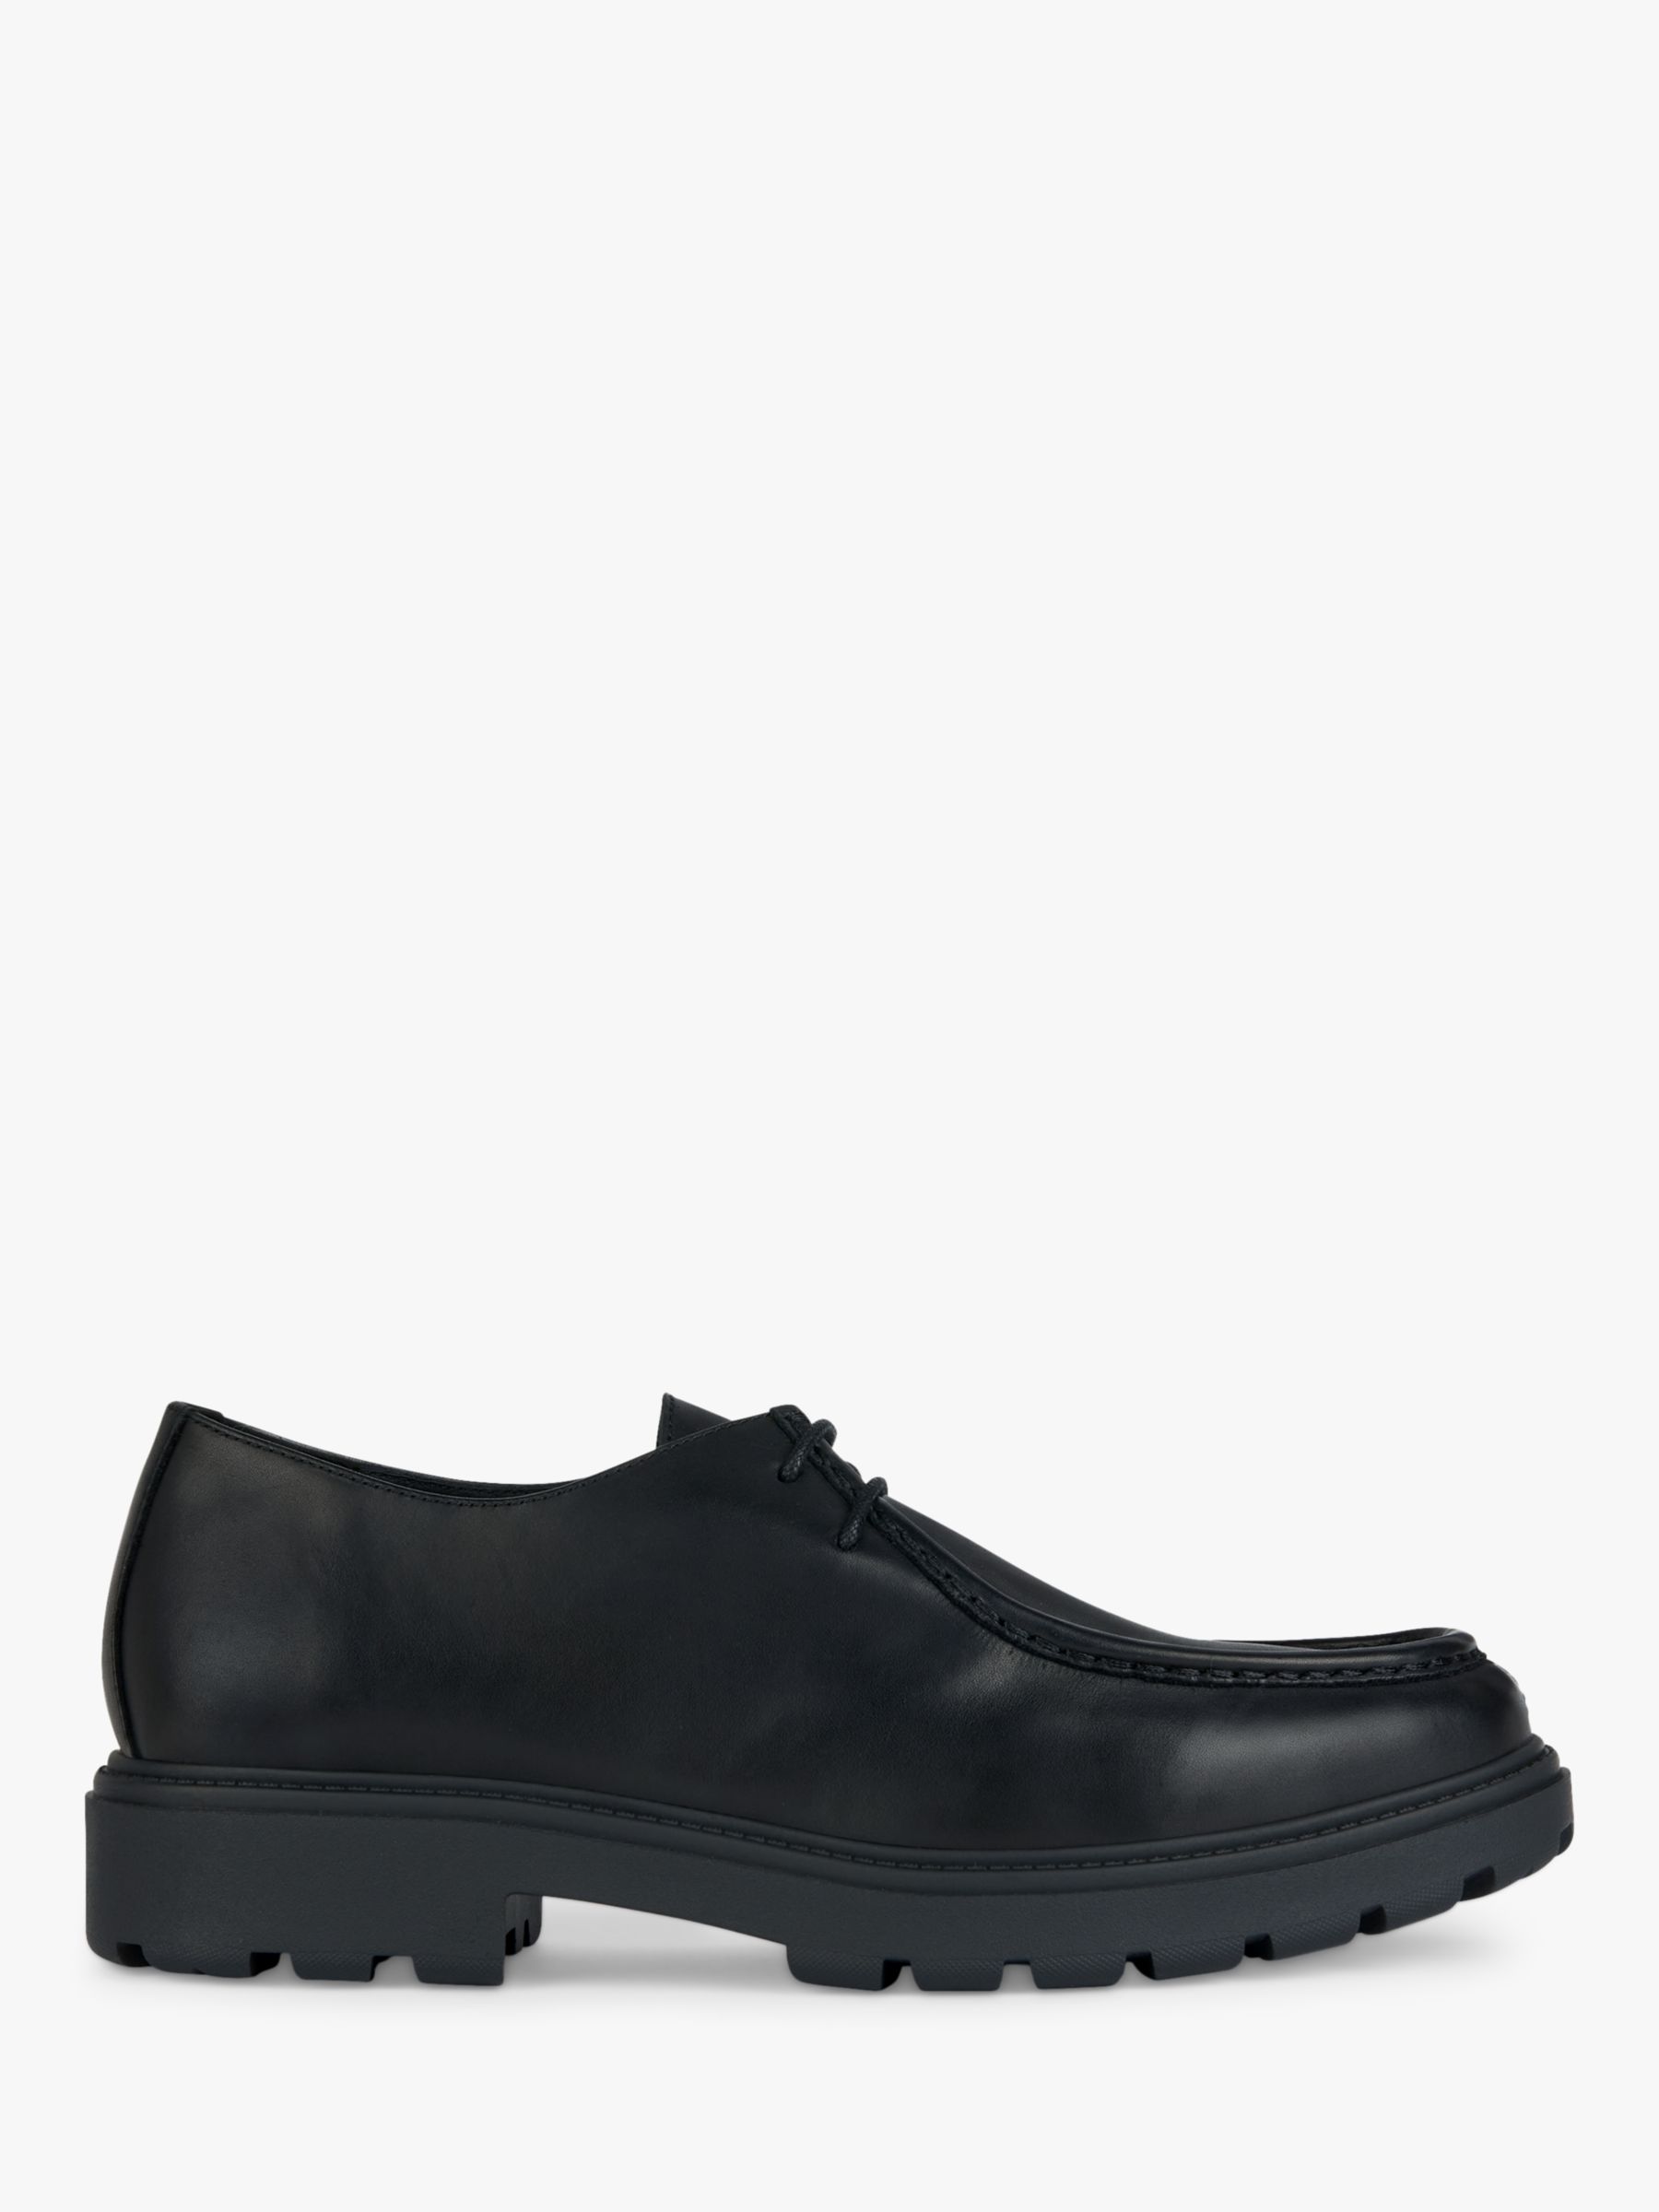 Geox Spherica Lace Up Shoes, Black at John Lewis & Partners